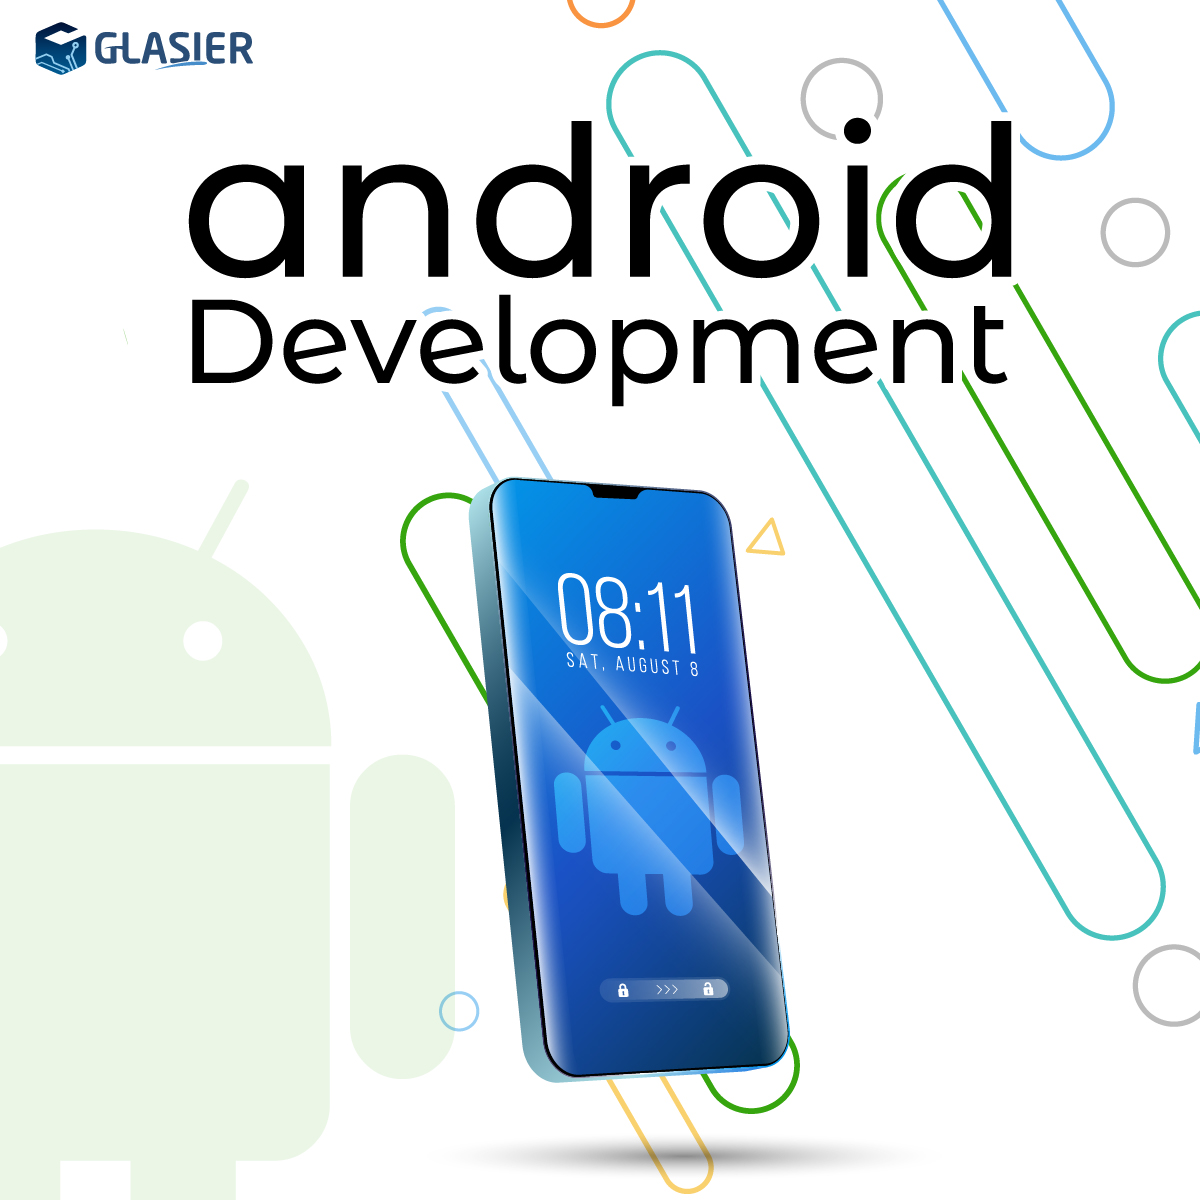 Android App Development Agency | Android App Development Services,ServicesBusiness OffersAll Indiaother